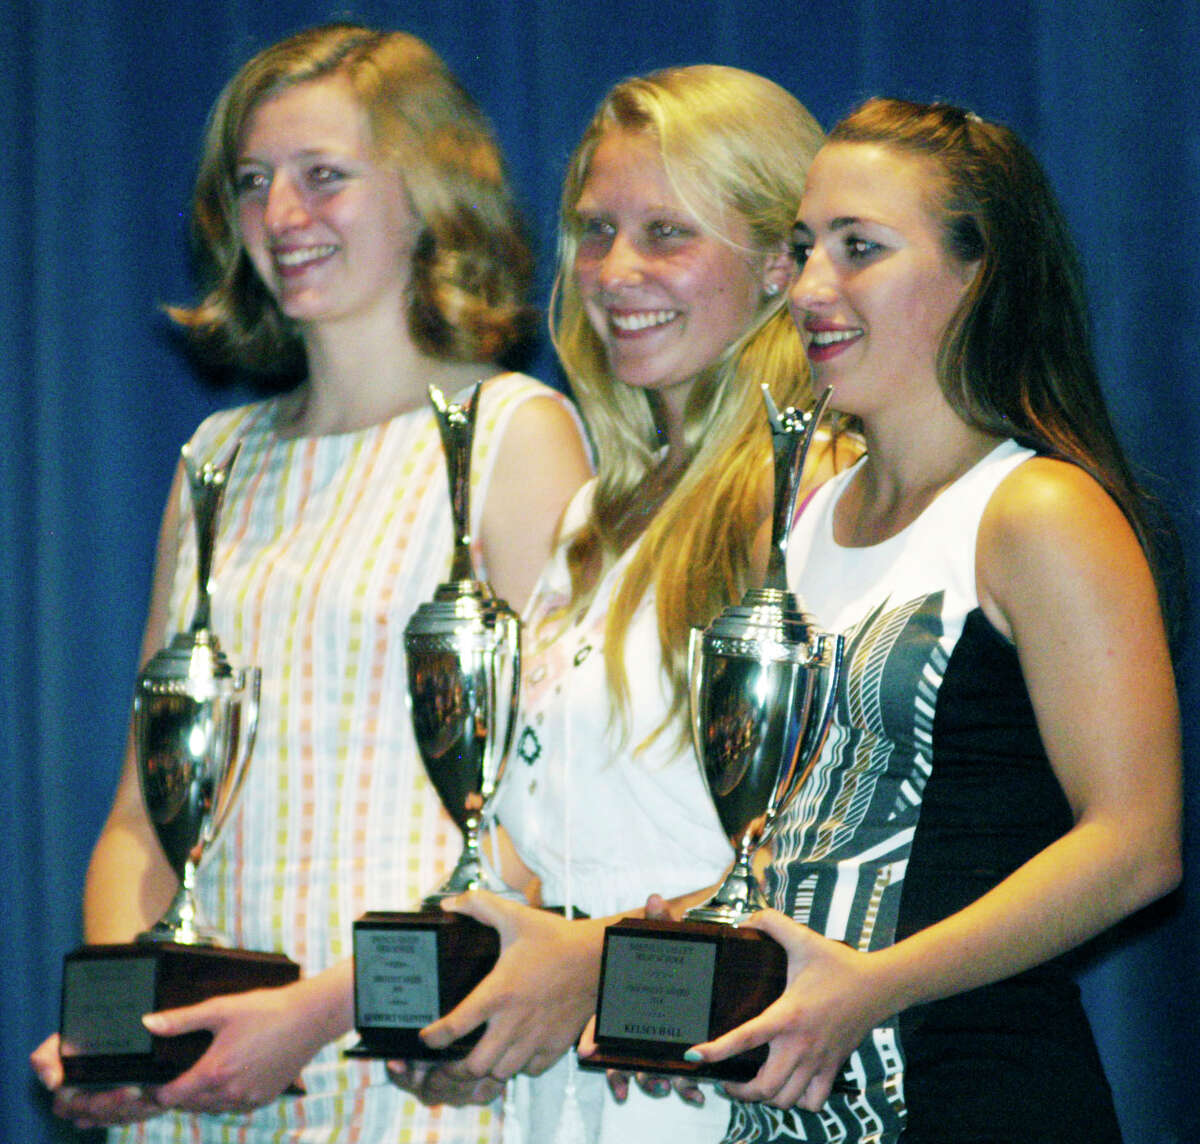 The school's 1,000-point athletes this year, from right to left, Kelsey Hall, Kim Valentine and Clara Wolfe, enjoy the spotlight during Shepaug Valley High School's annual athletic awards ceremony, June 6, 2014 at the school in Washington.